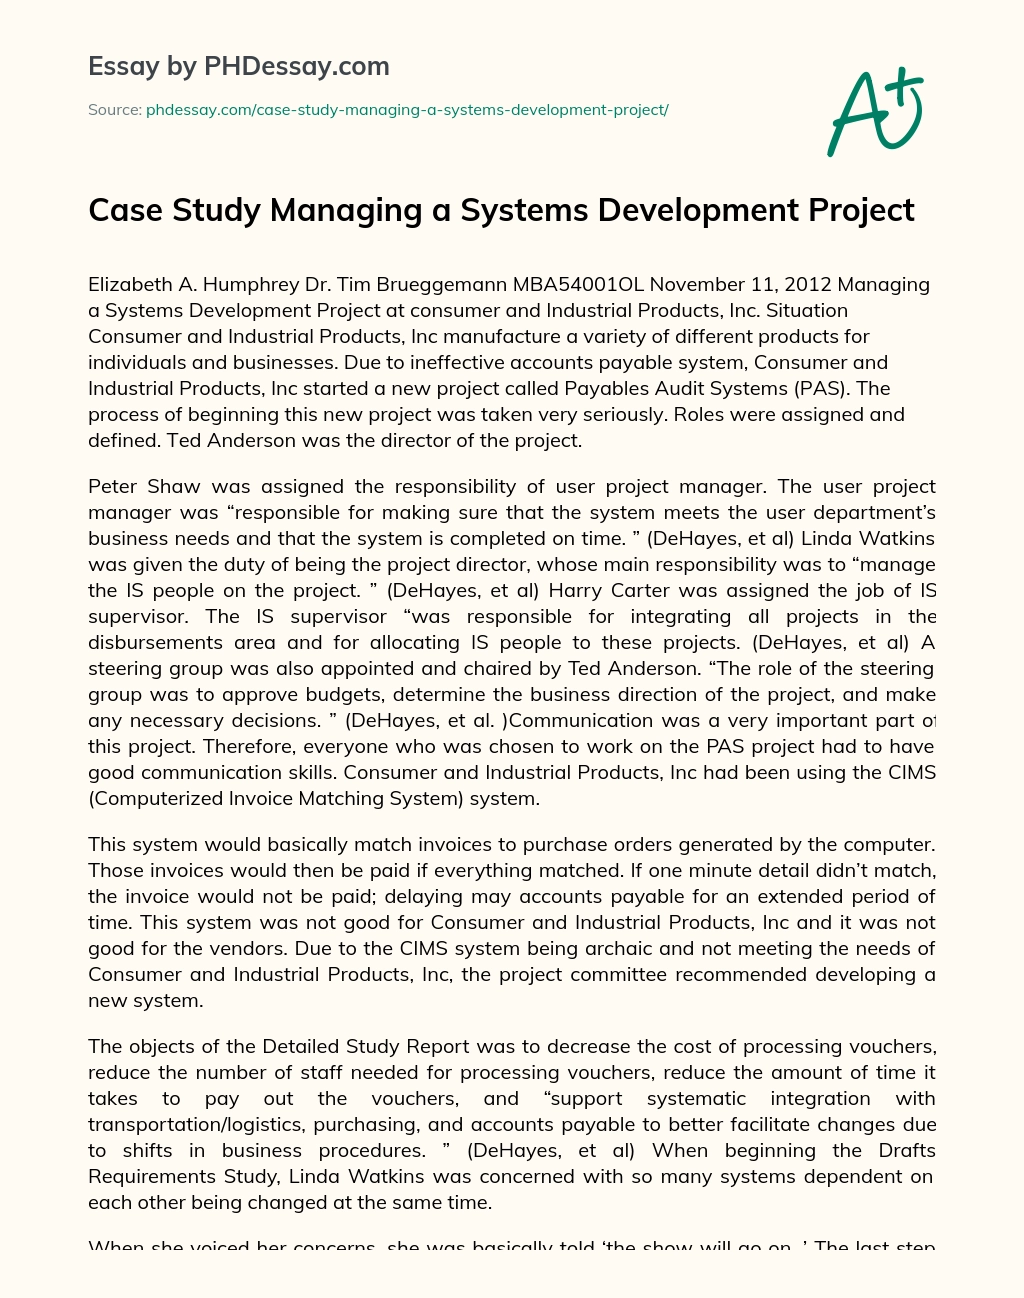 Case Study Managing a Systems Development Project essay